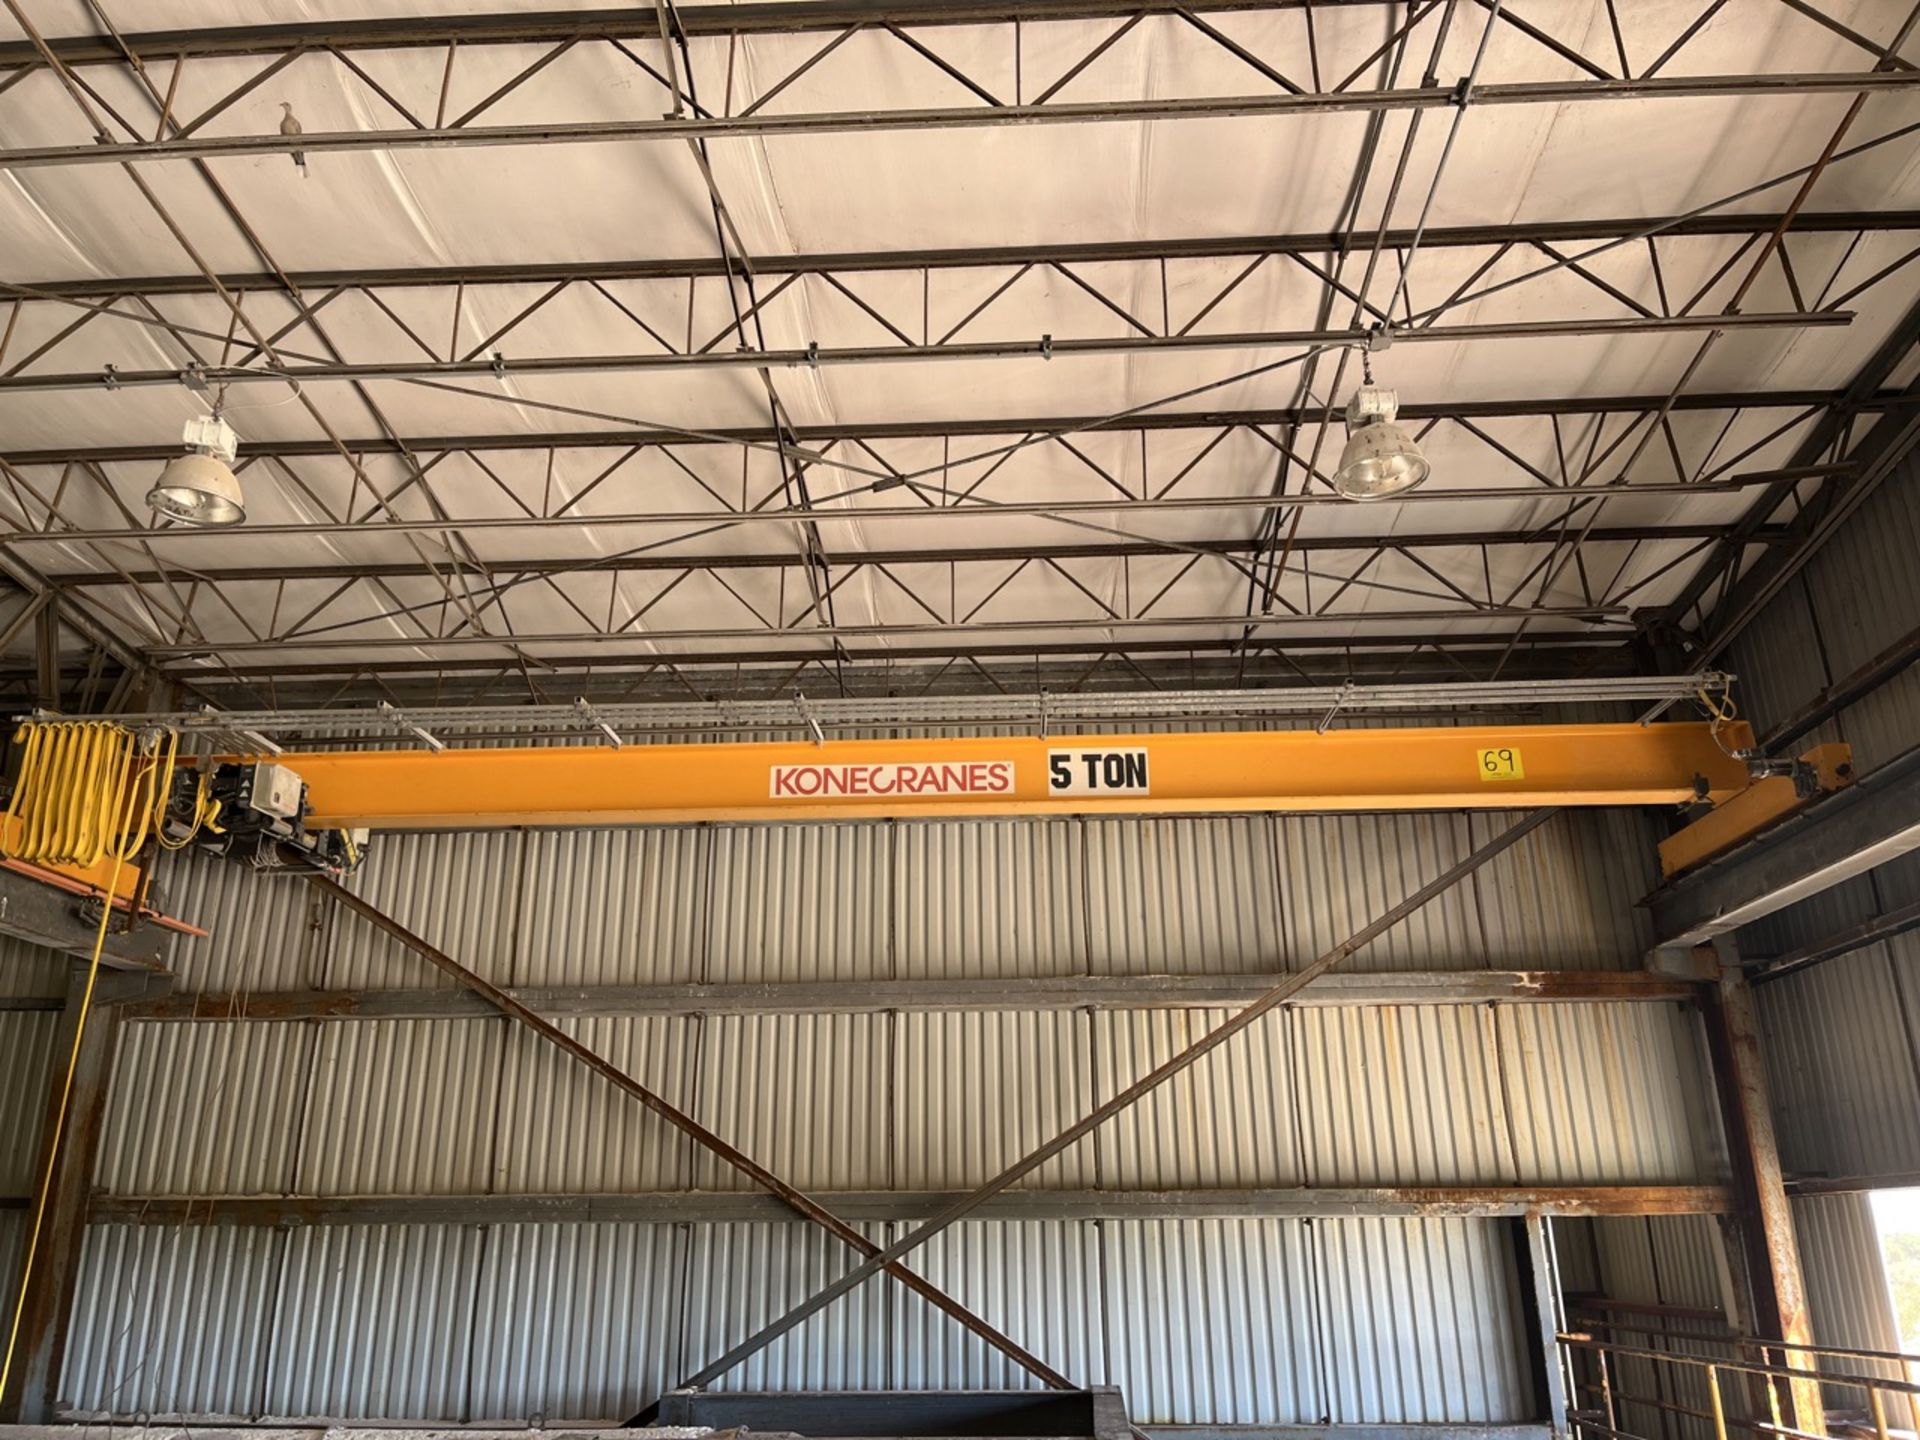 Konecranes overhead crane with a load capacity of 5 tons and a 15-meter lifting capacity; includes - Image 11 of 12